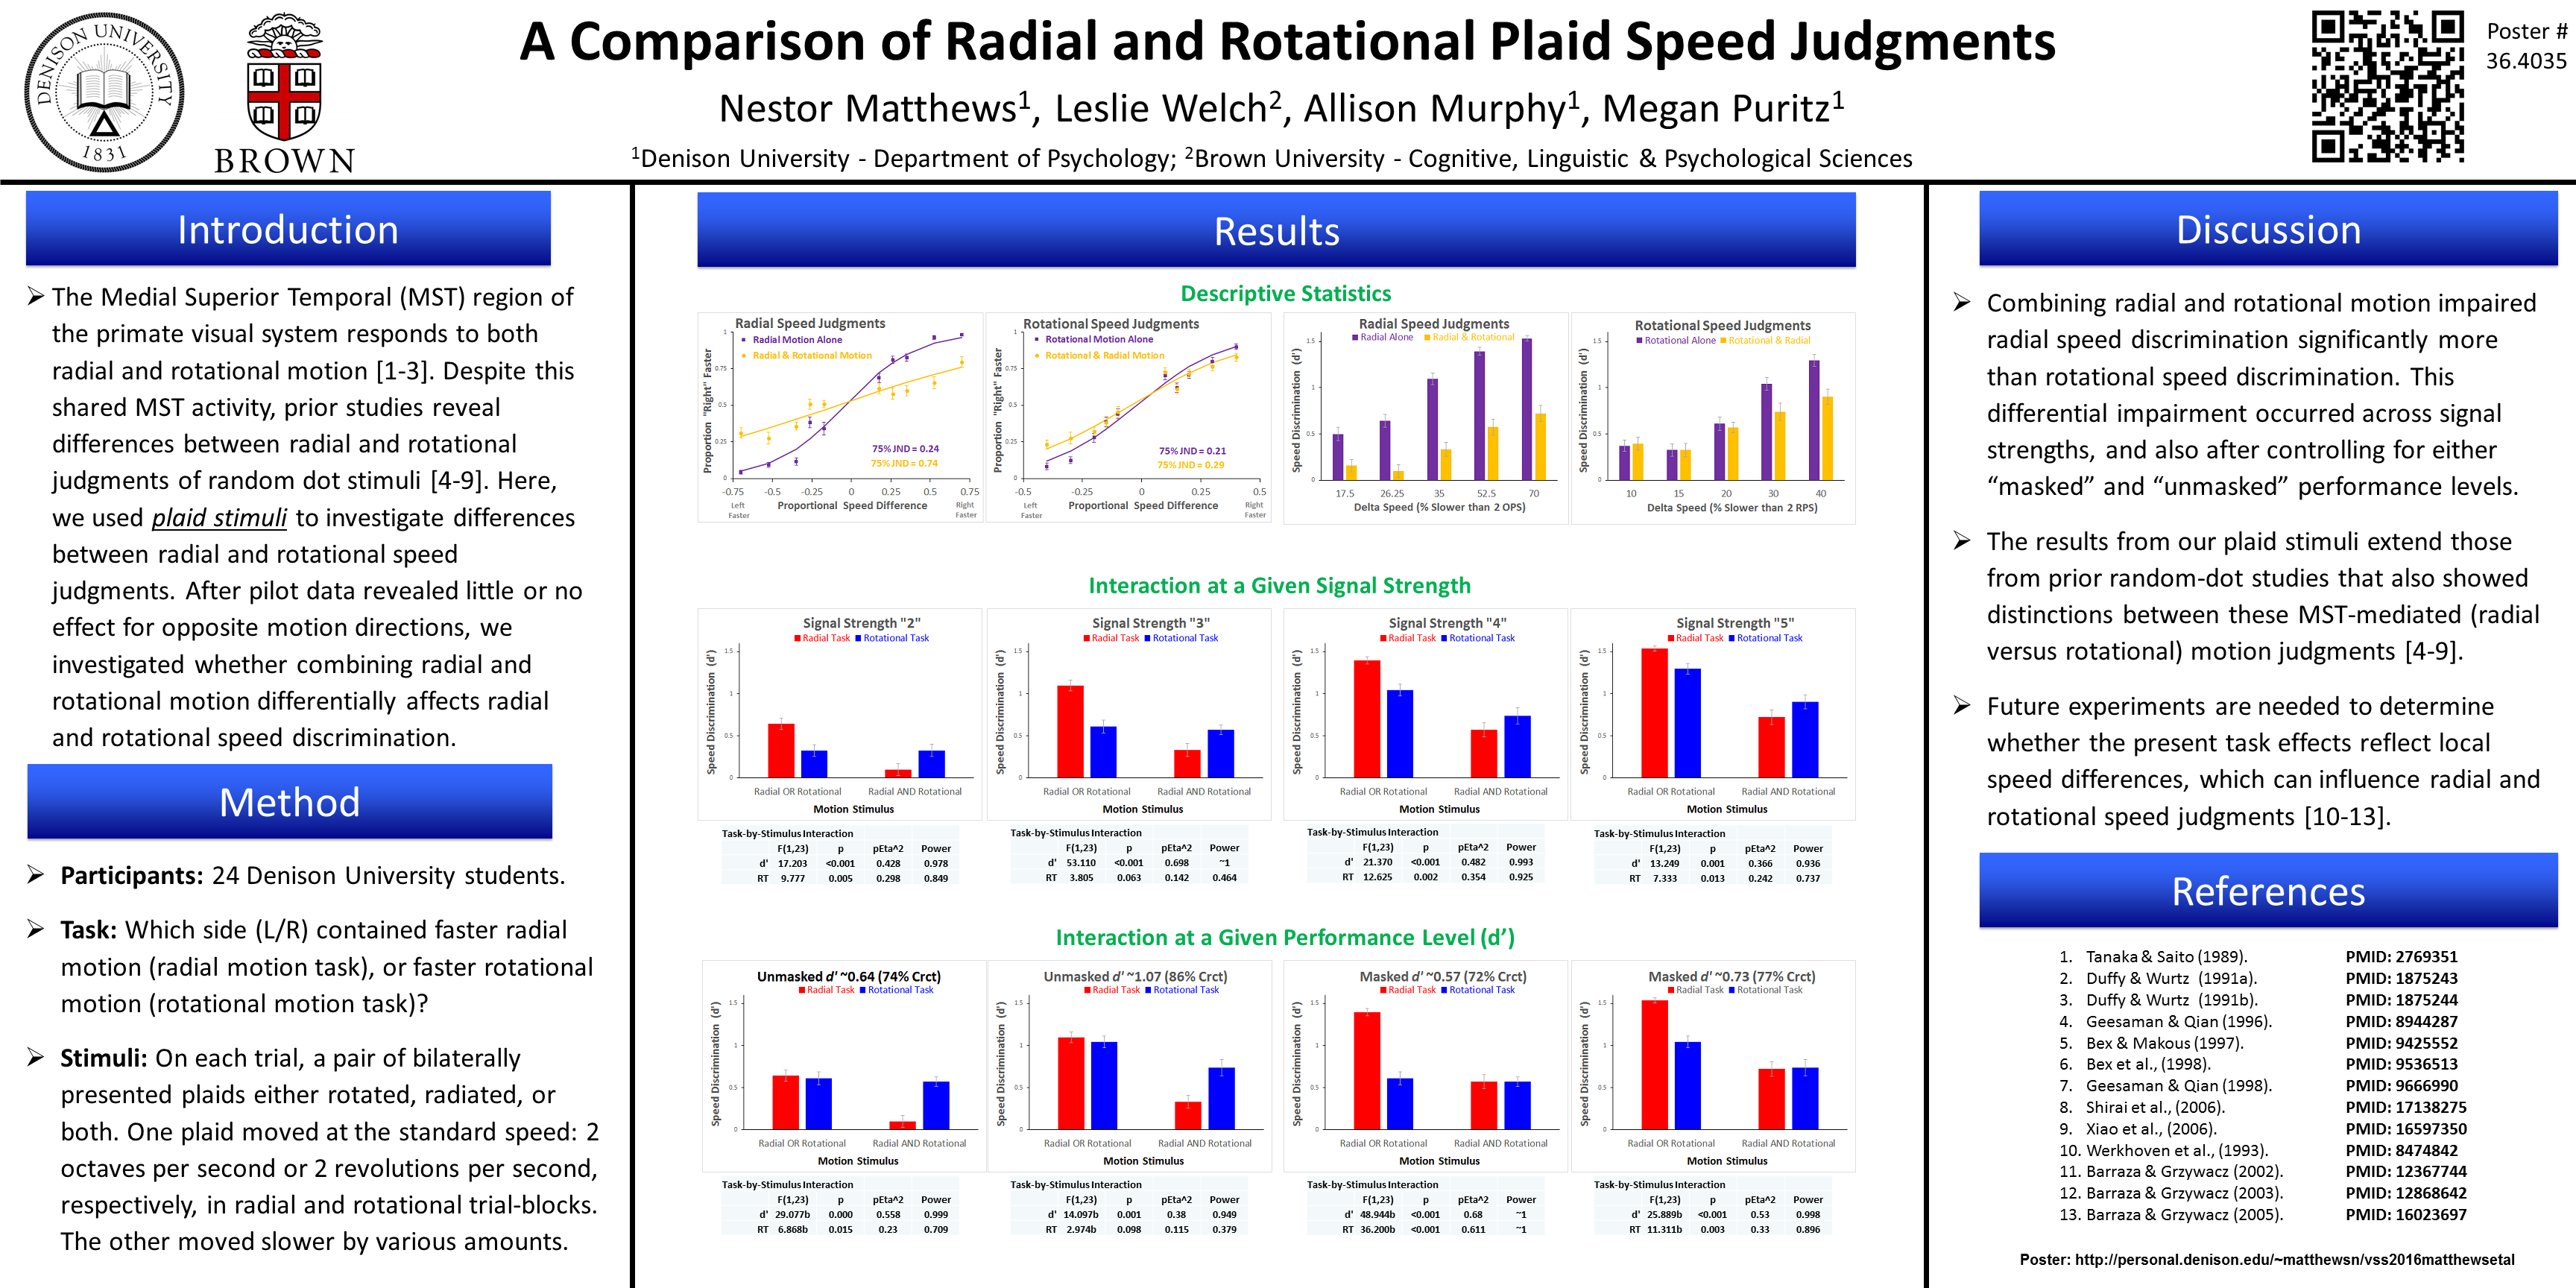 A Comparison of Radial and Rotational Plaid Speed Judgments, VSS 2016